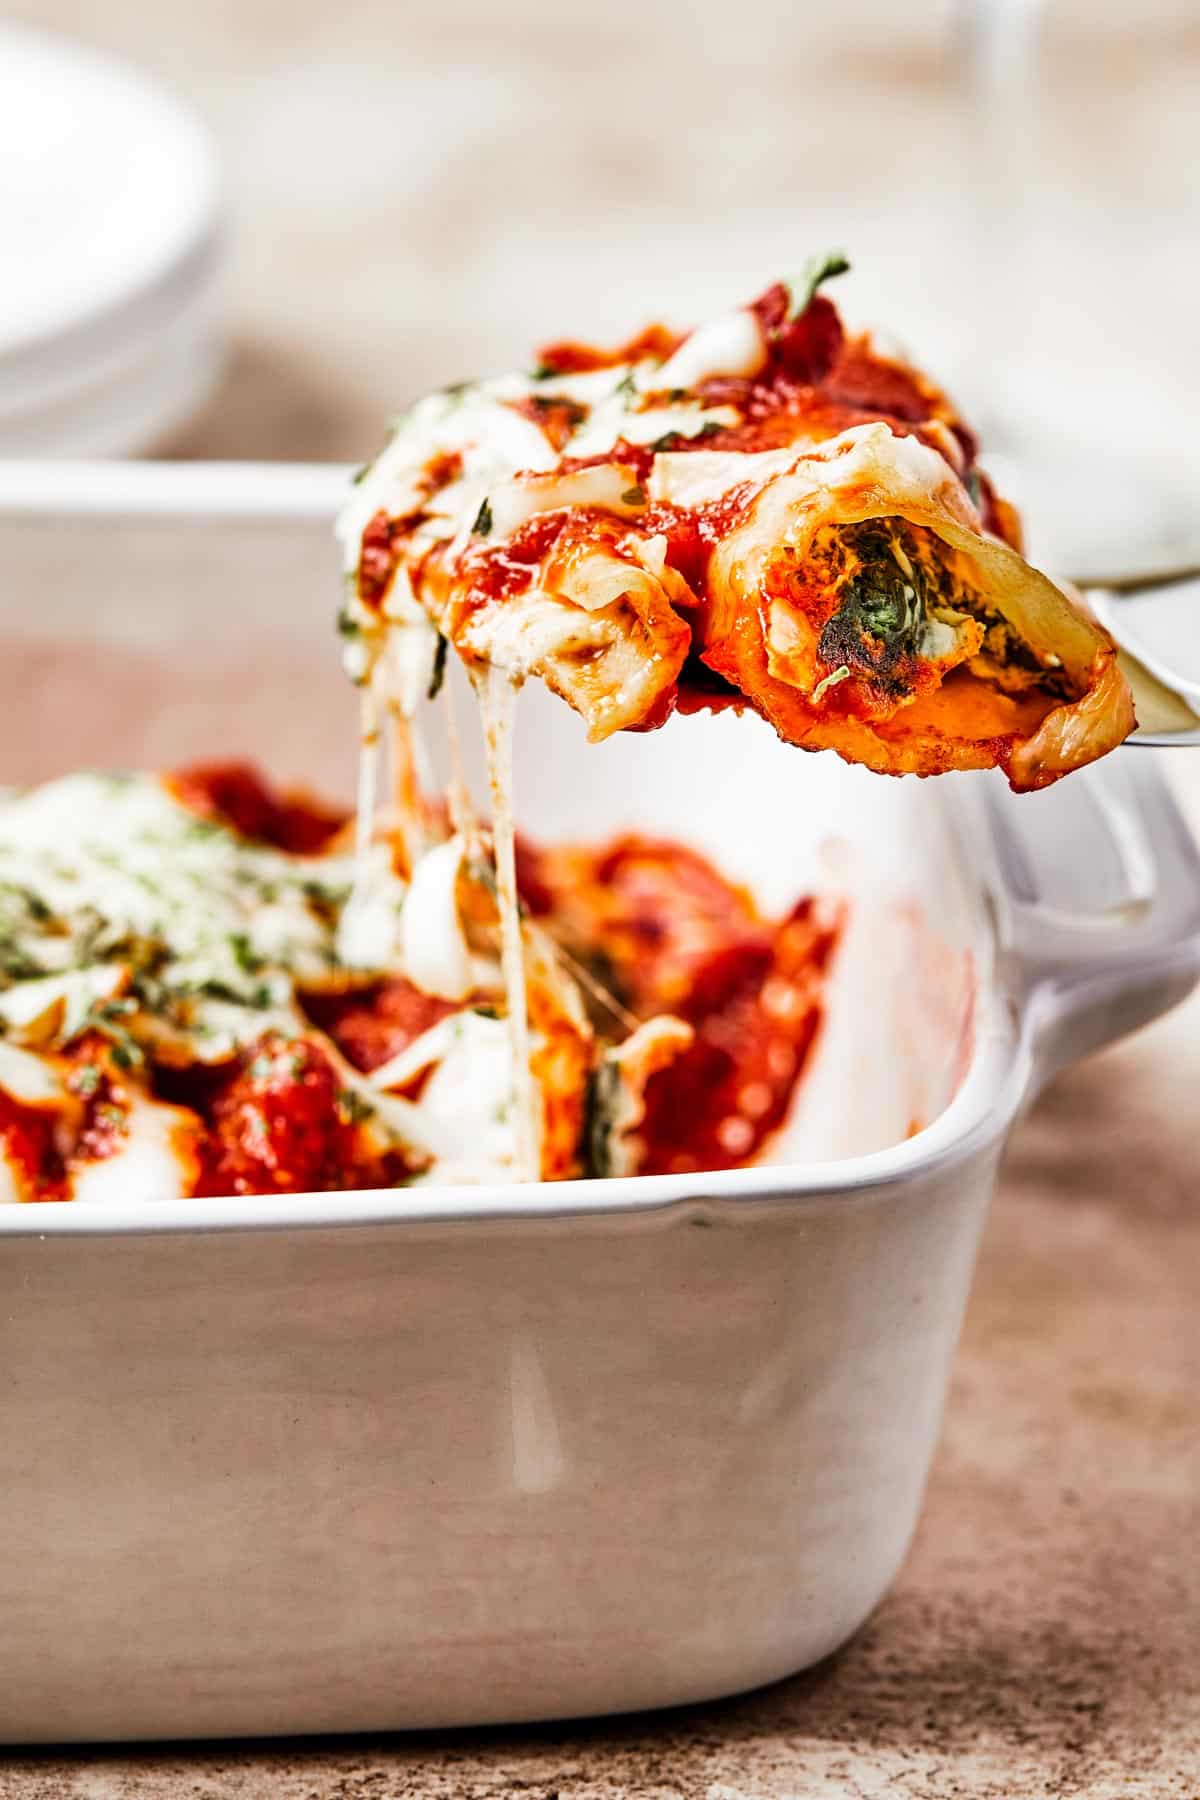 A serving of cheese manicotti being lifted from a casserole dish on a spatula.